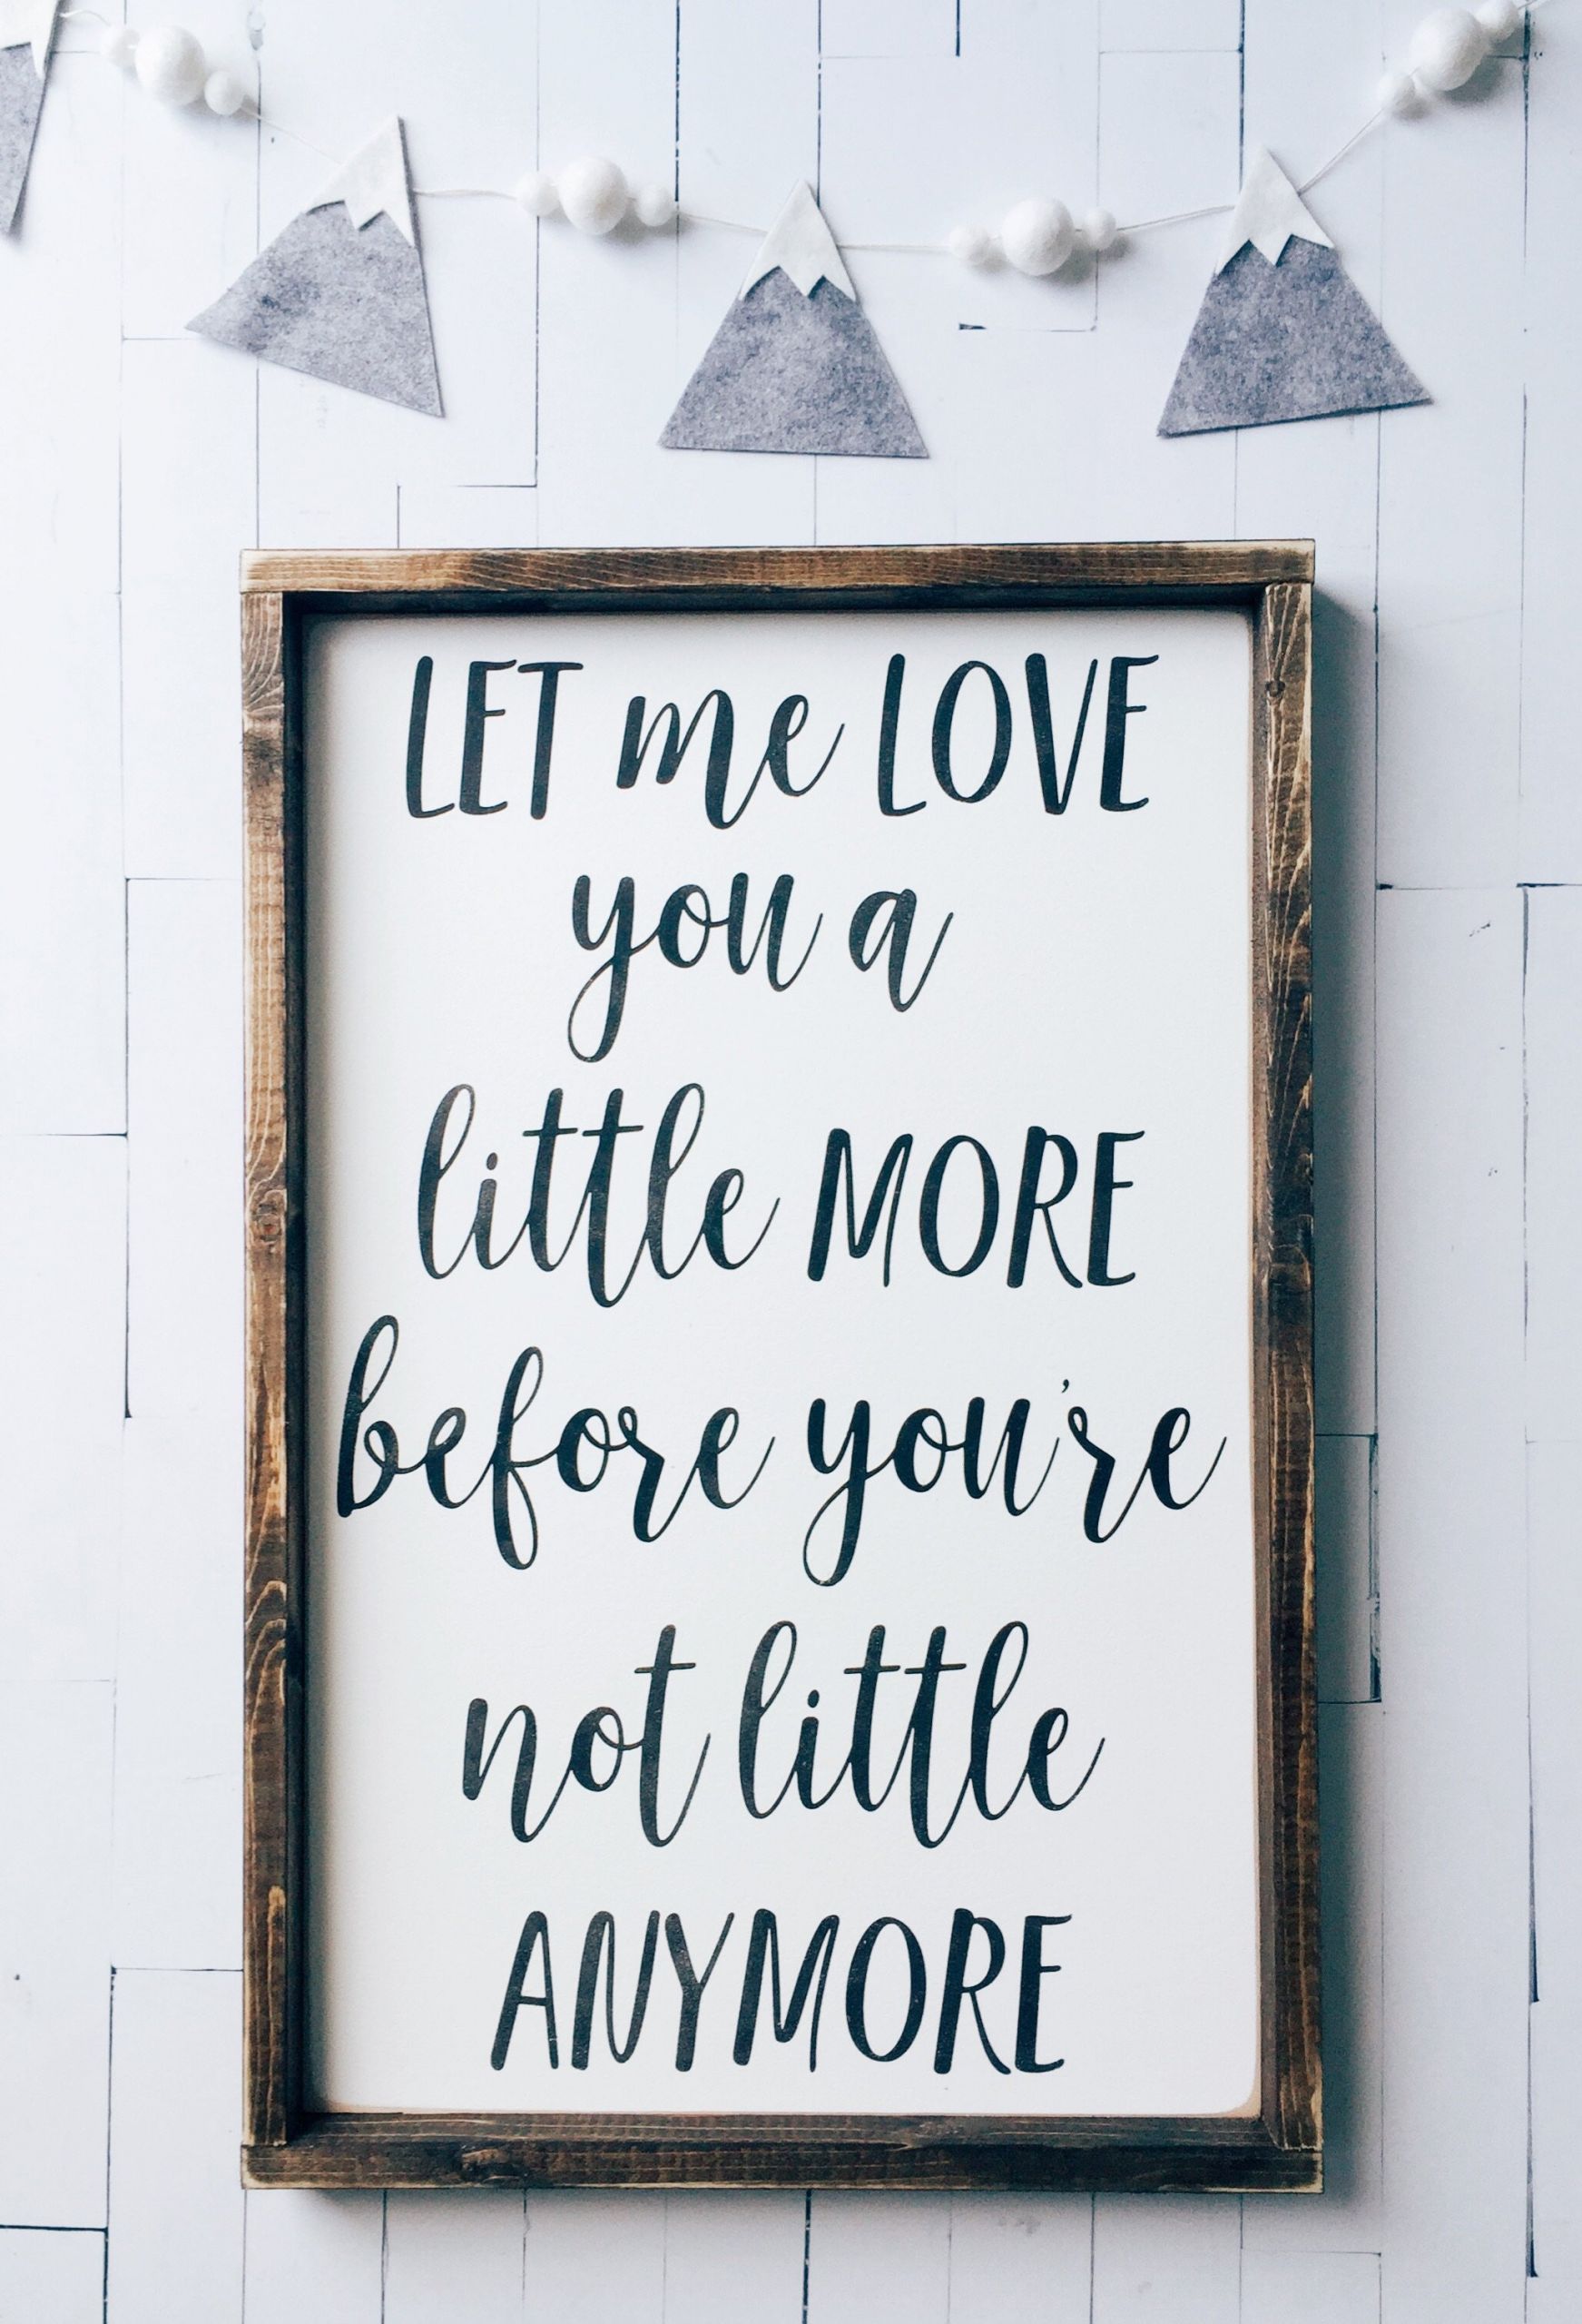 DIY Wood Signs With Quotes
 25 DIY Wood Signs Showcasing Your Designs with Rusticness